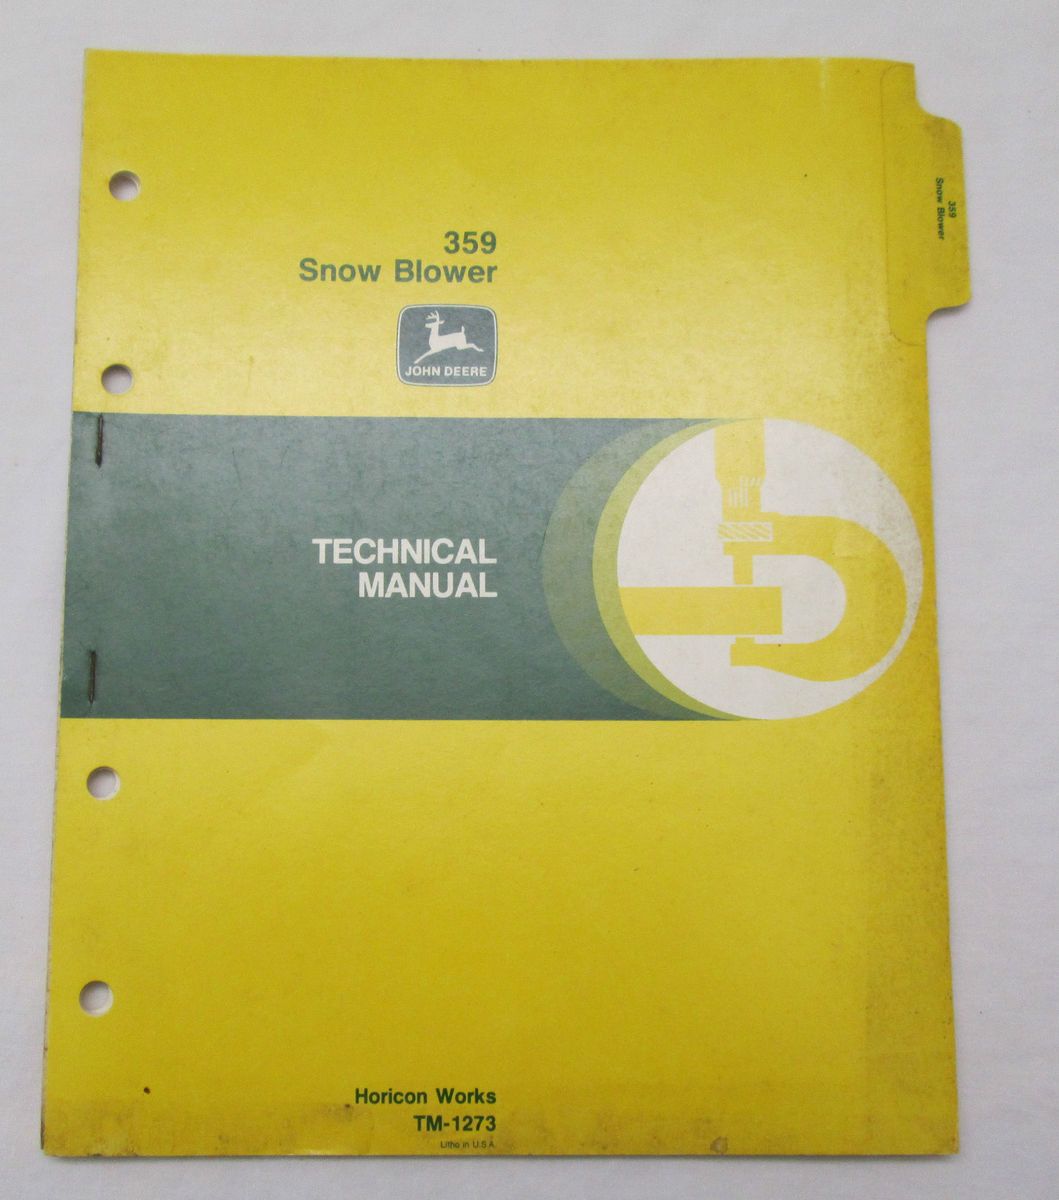  359 Snow Blower Technical Manual Horicon Works TM 1273 USA